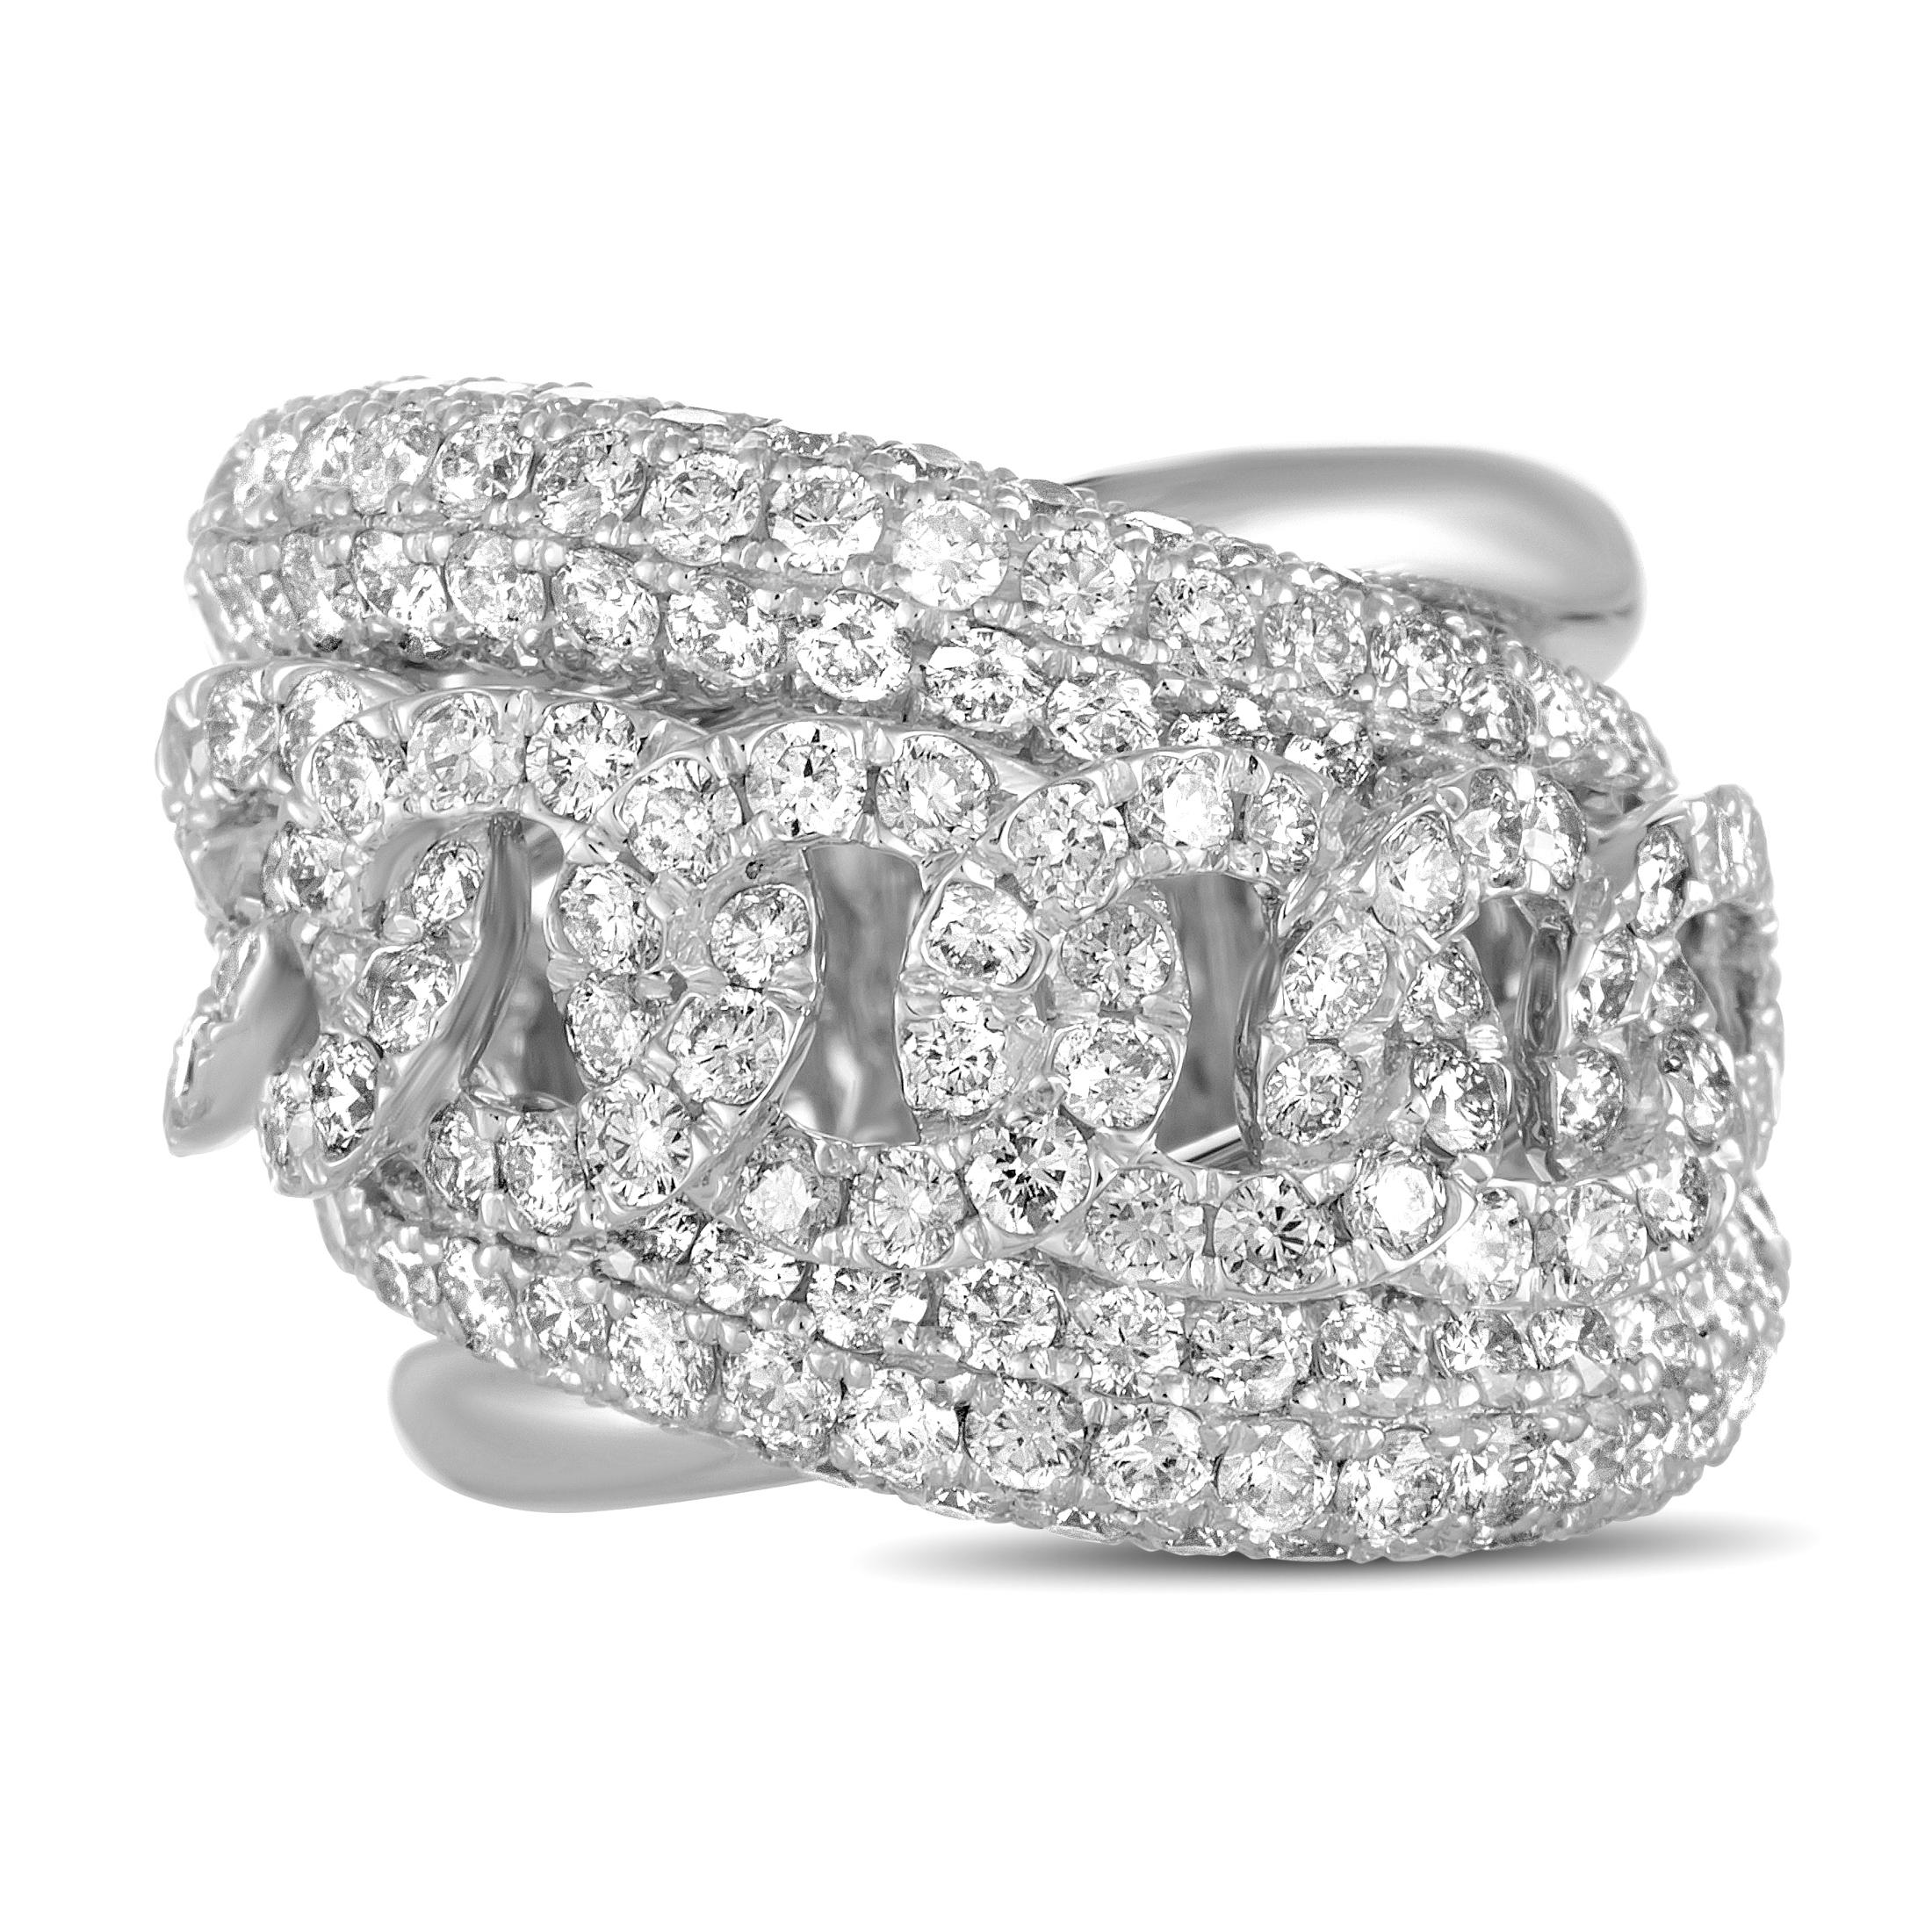 This LB Exclusive ring is crafted from 18K white gold and weighs 15.5 grams, boasting a total of 4.80 carats of diamonds. Band thickness and ring top height measure 10 and 8 mm respectively, while ring top dimensions are 18 by 25 mm.

Offered in